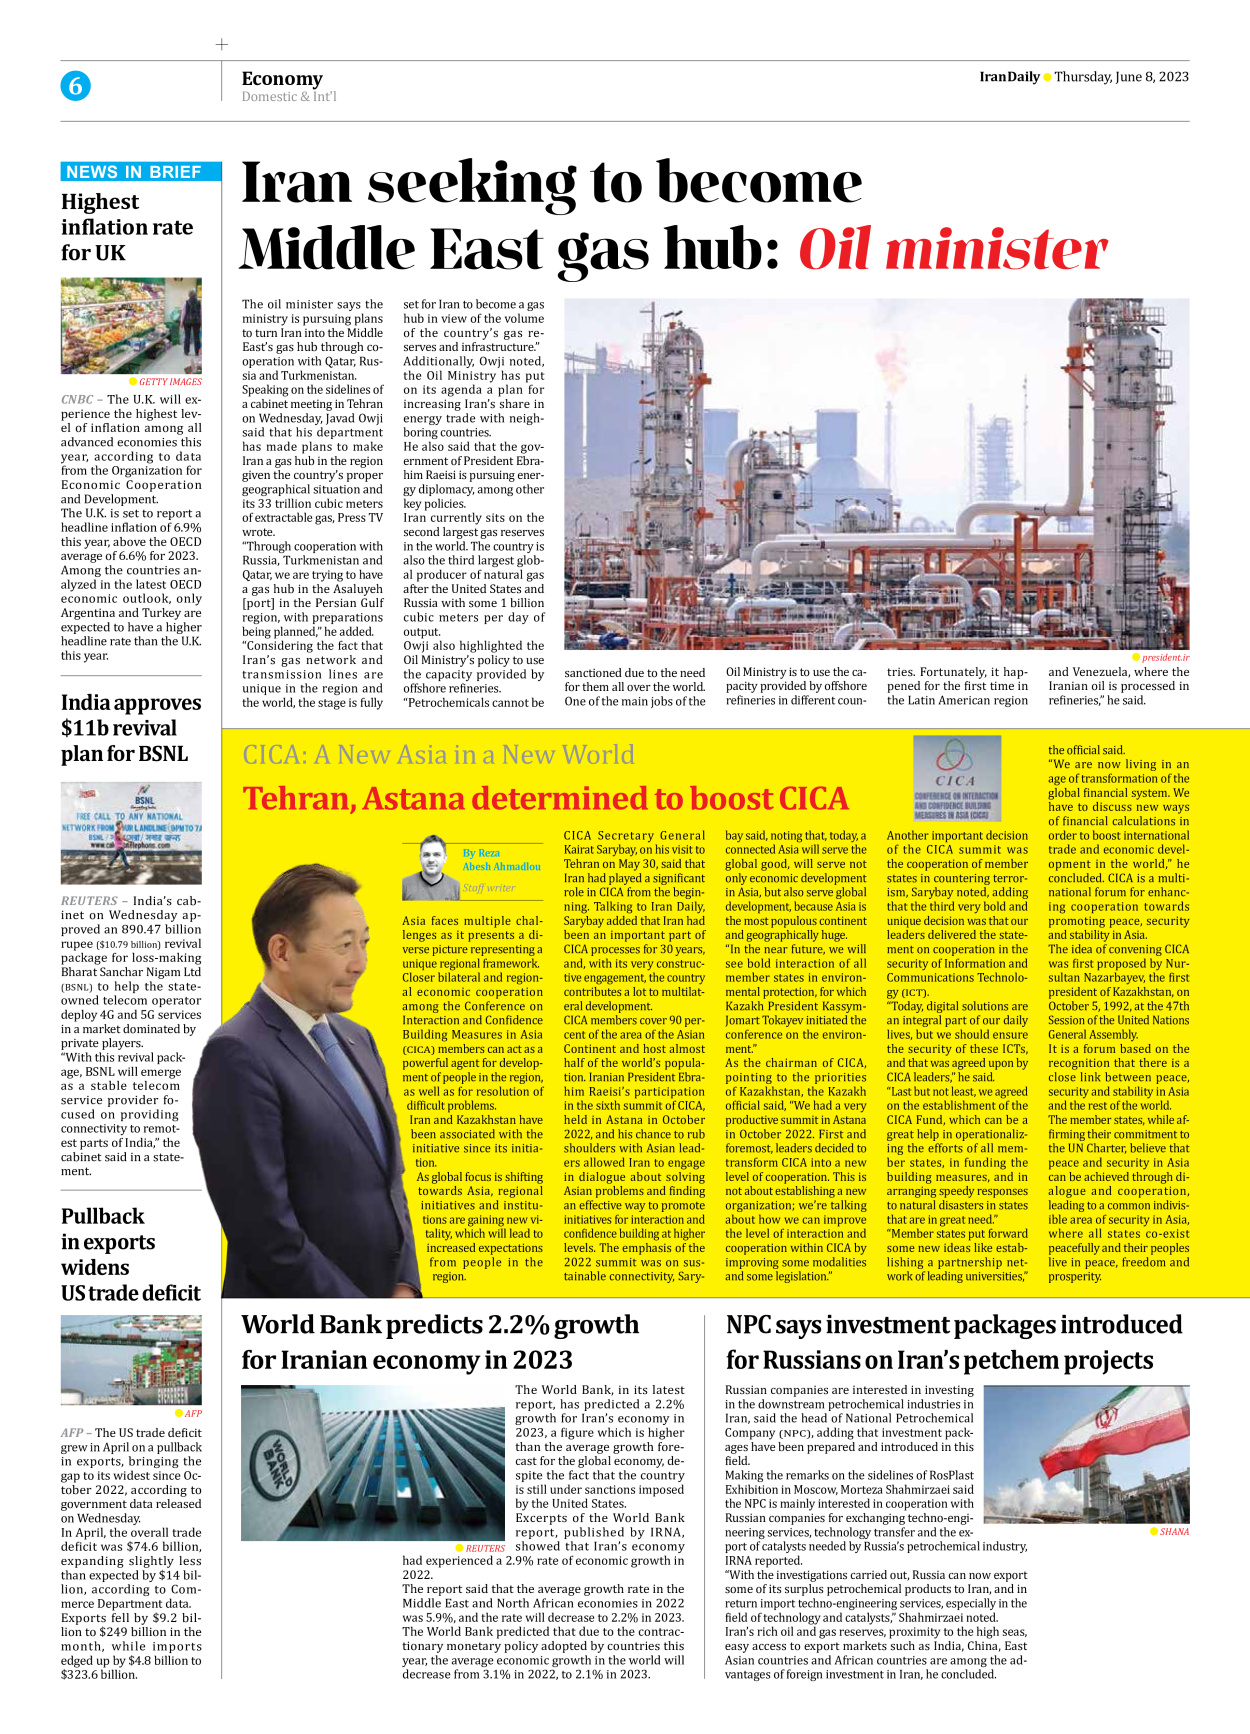 Iran Daily - Number Seven Thousand Three Hundred and Nine - 08 June 2023 - Page 6